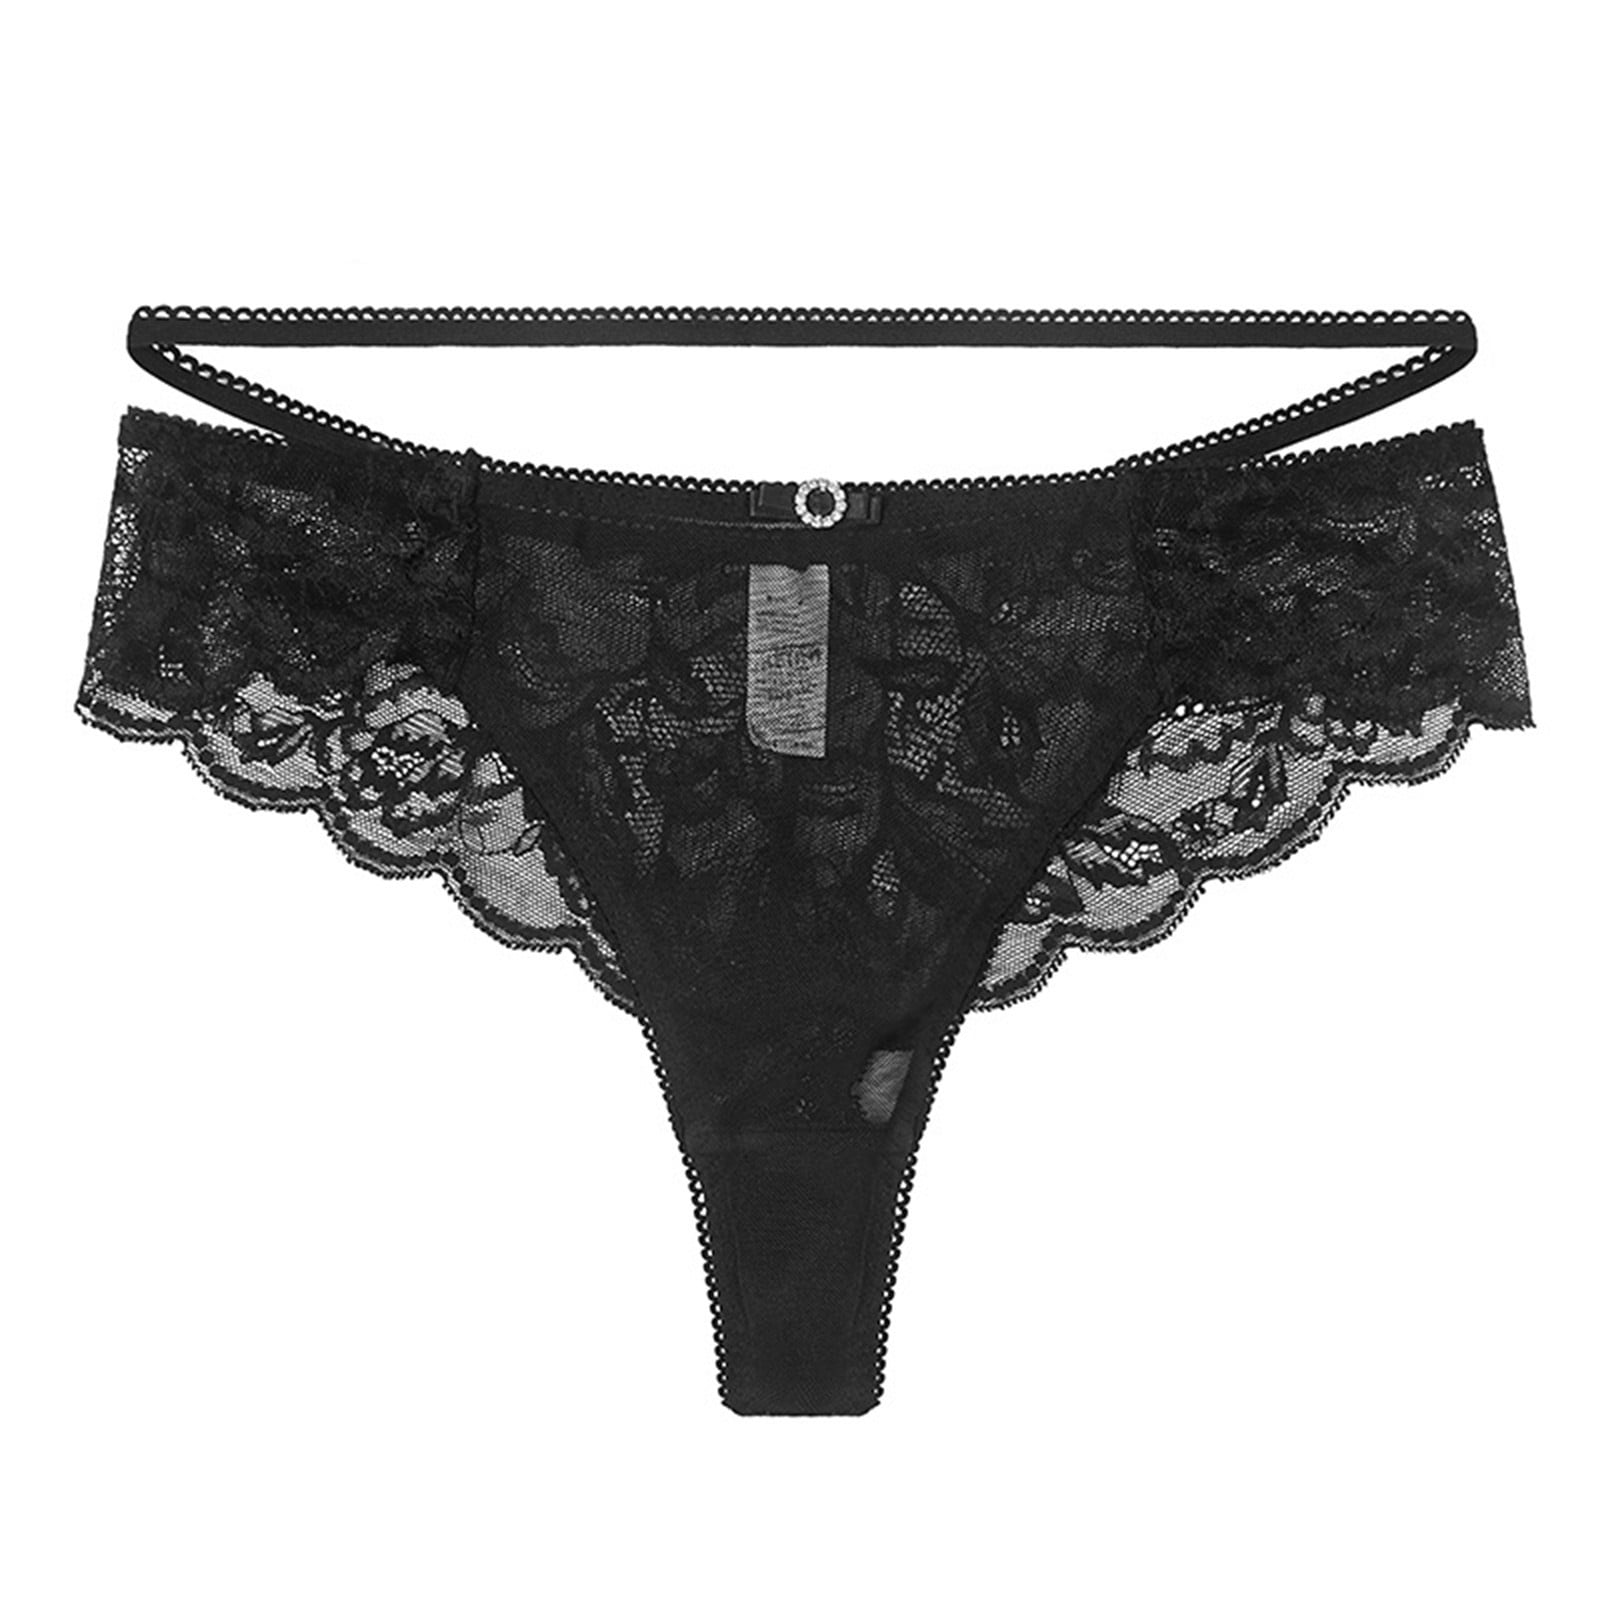 Lingerie For Women Sheer Lace Panties See Through Mesh Cotton Crotch Seamless Briefs Black